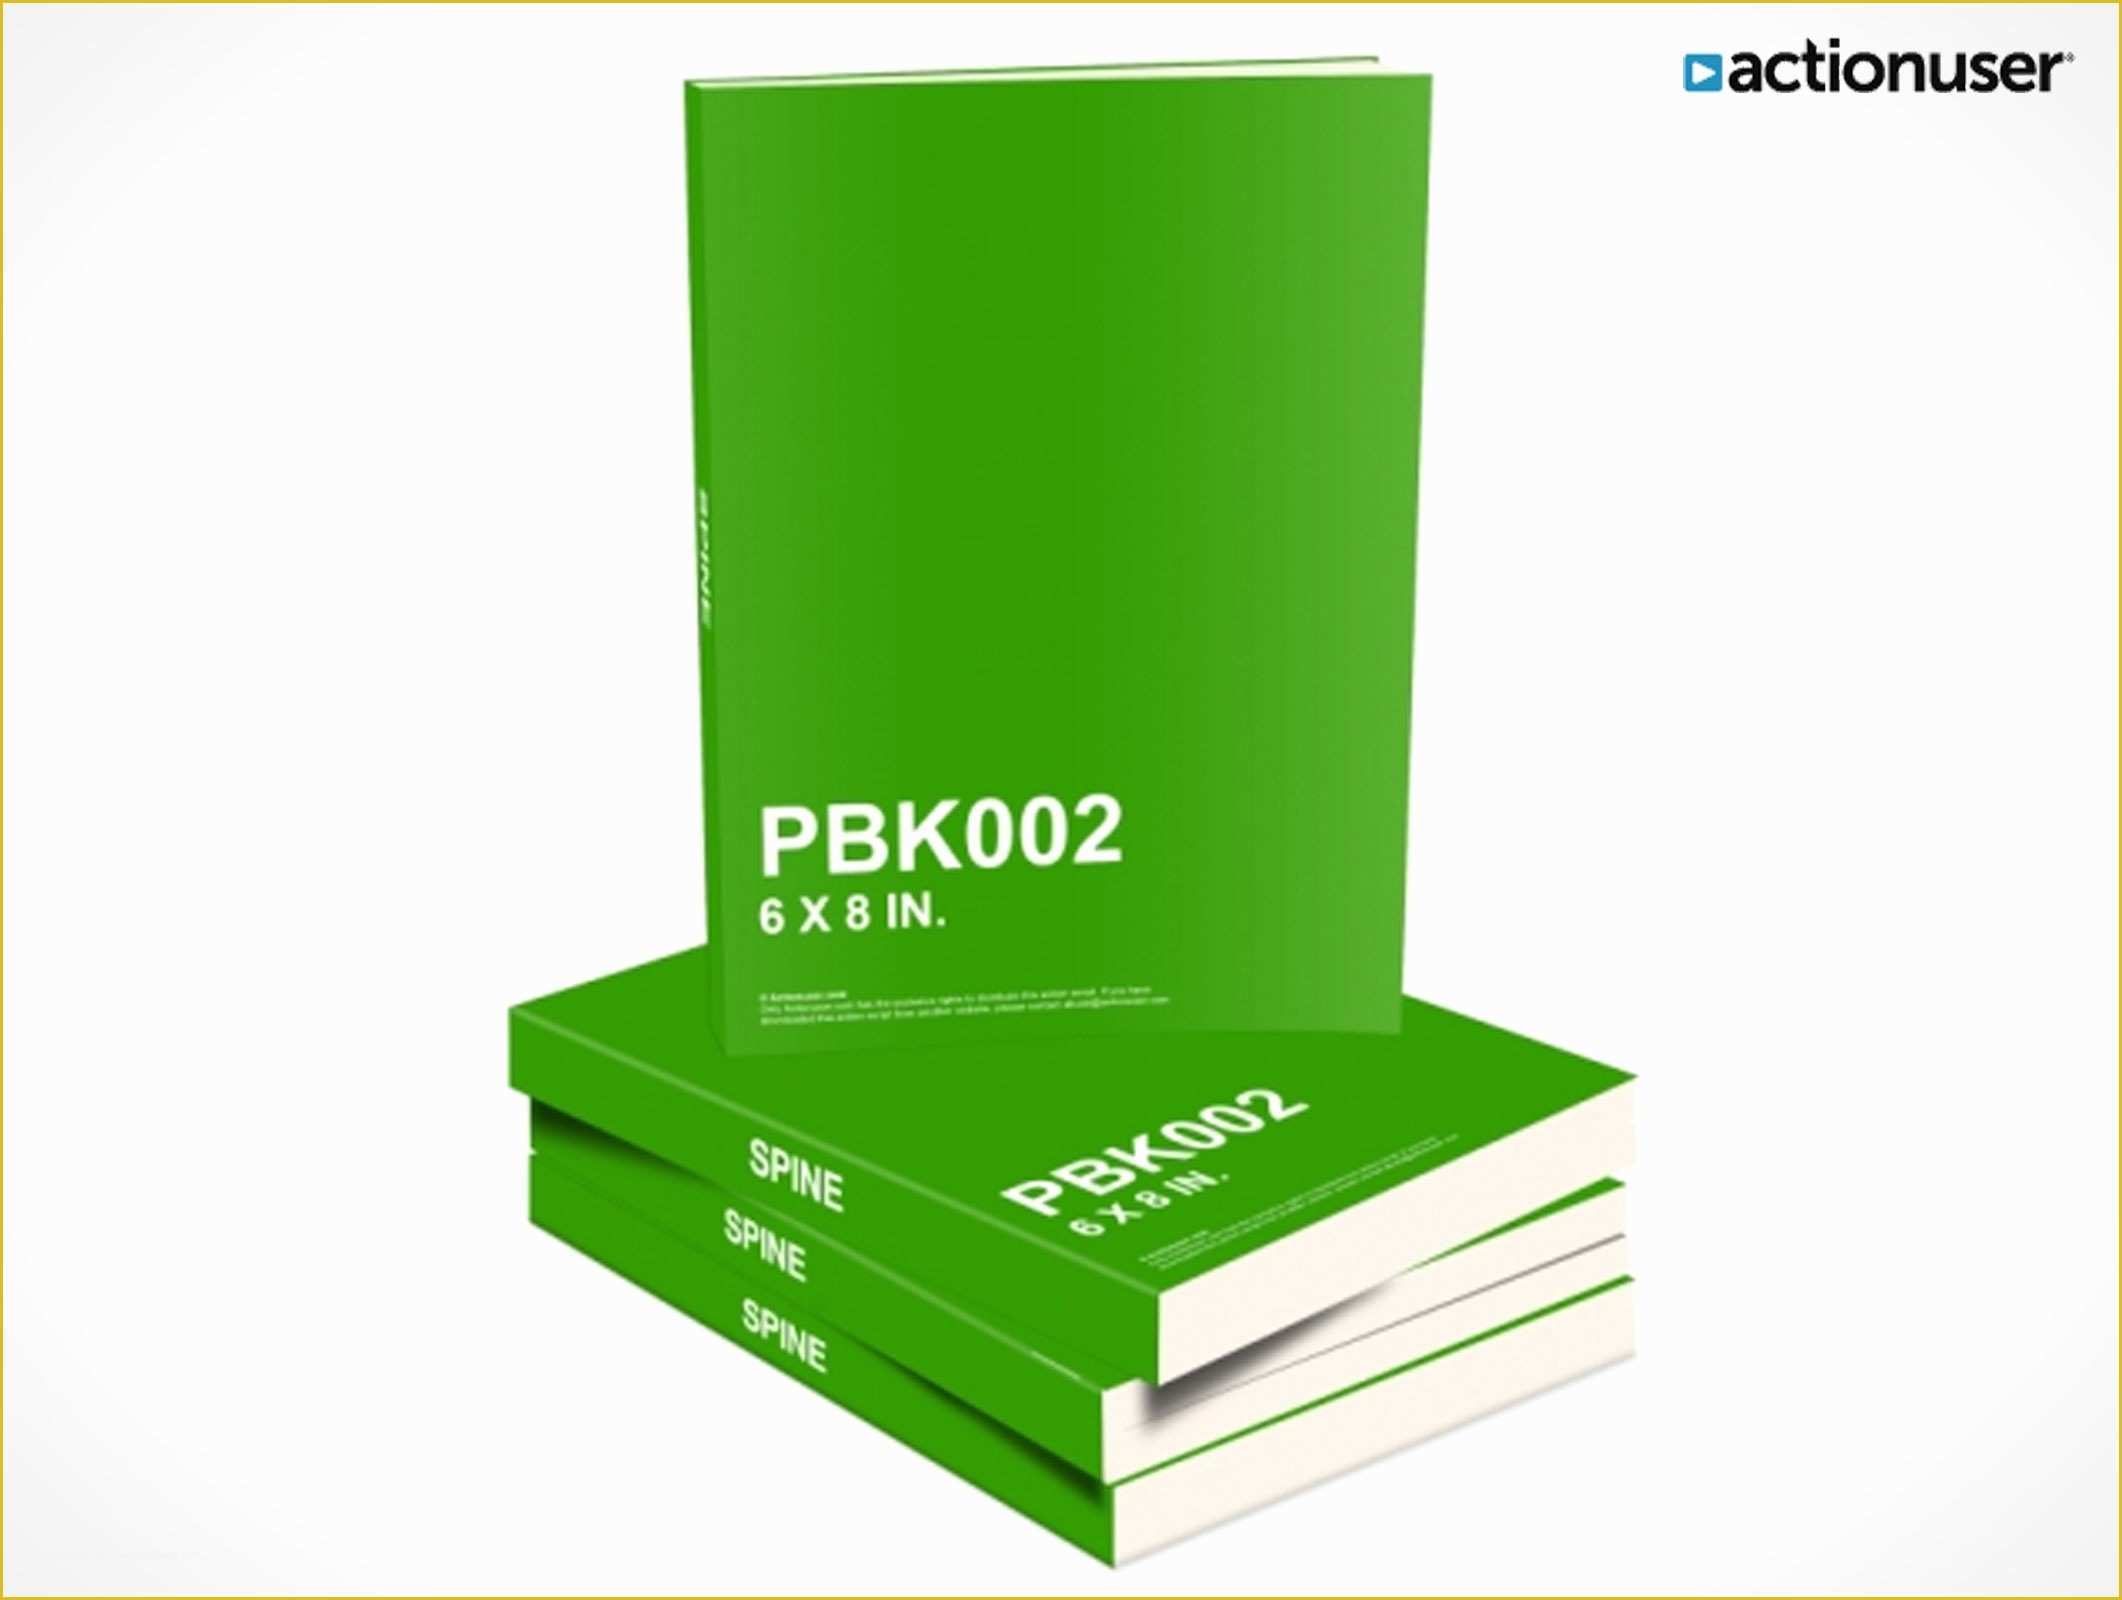 Download Free Ebook Cover Templates for Photoshop Of Psd Mockup Template Actionuser Stack Ebooks ...